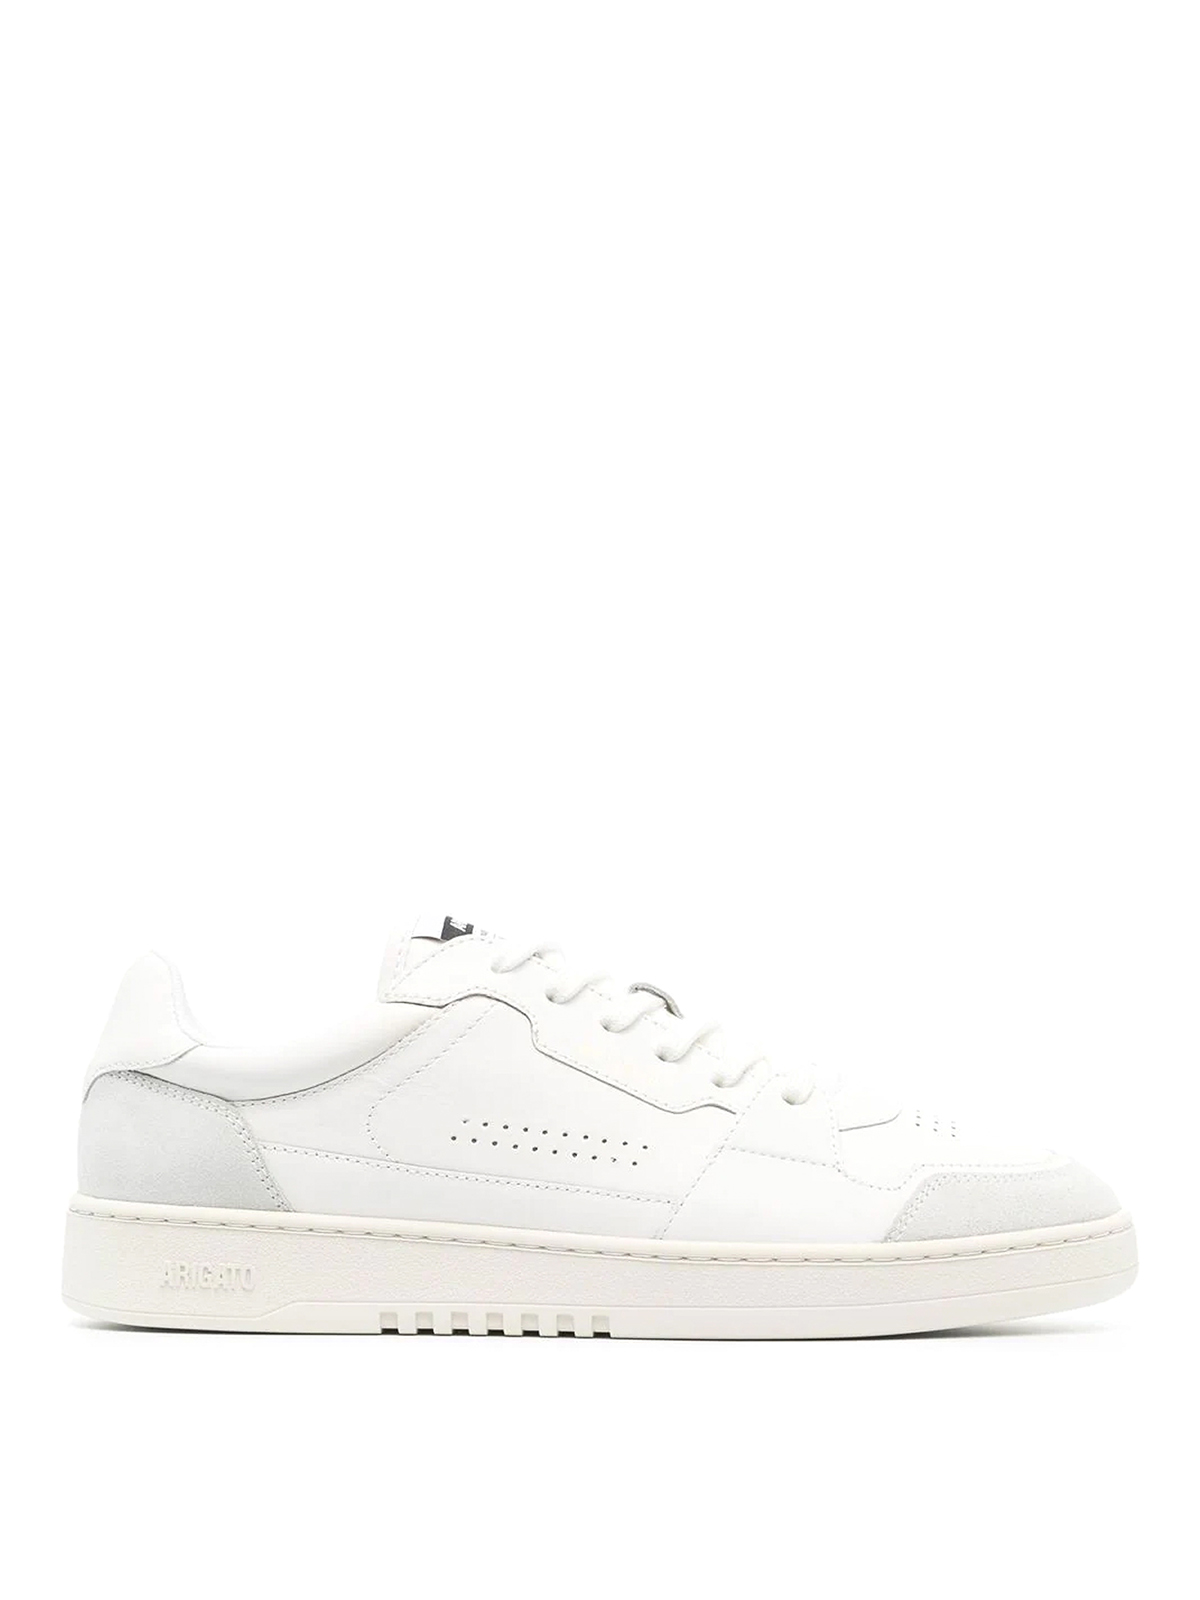 Axel Arigato Dice Leather Sneakers In White